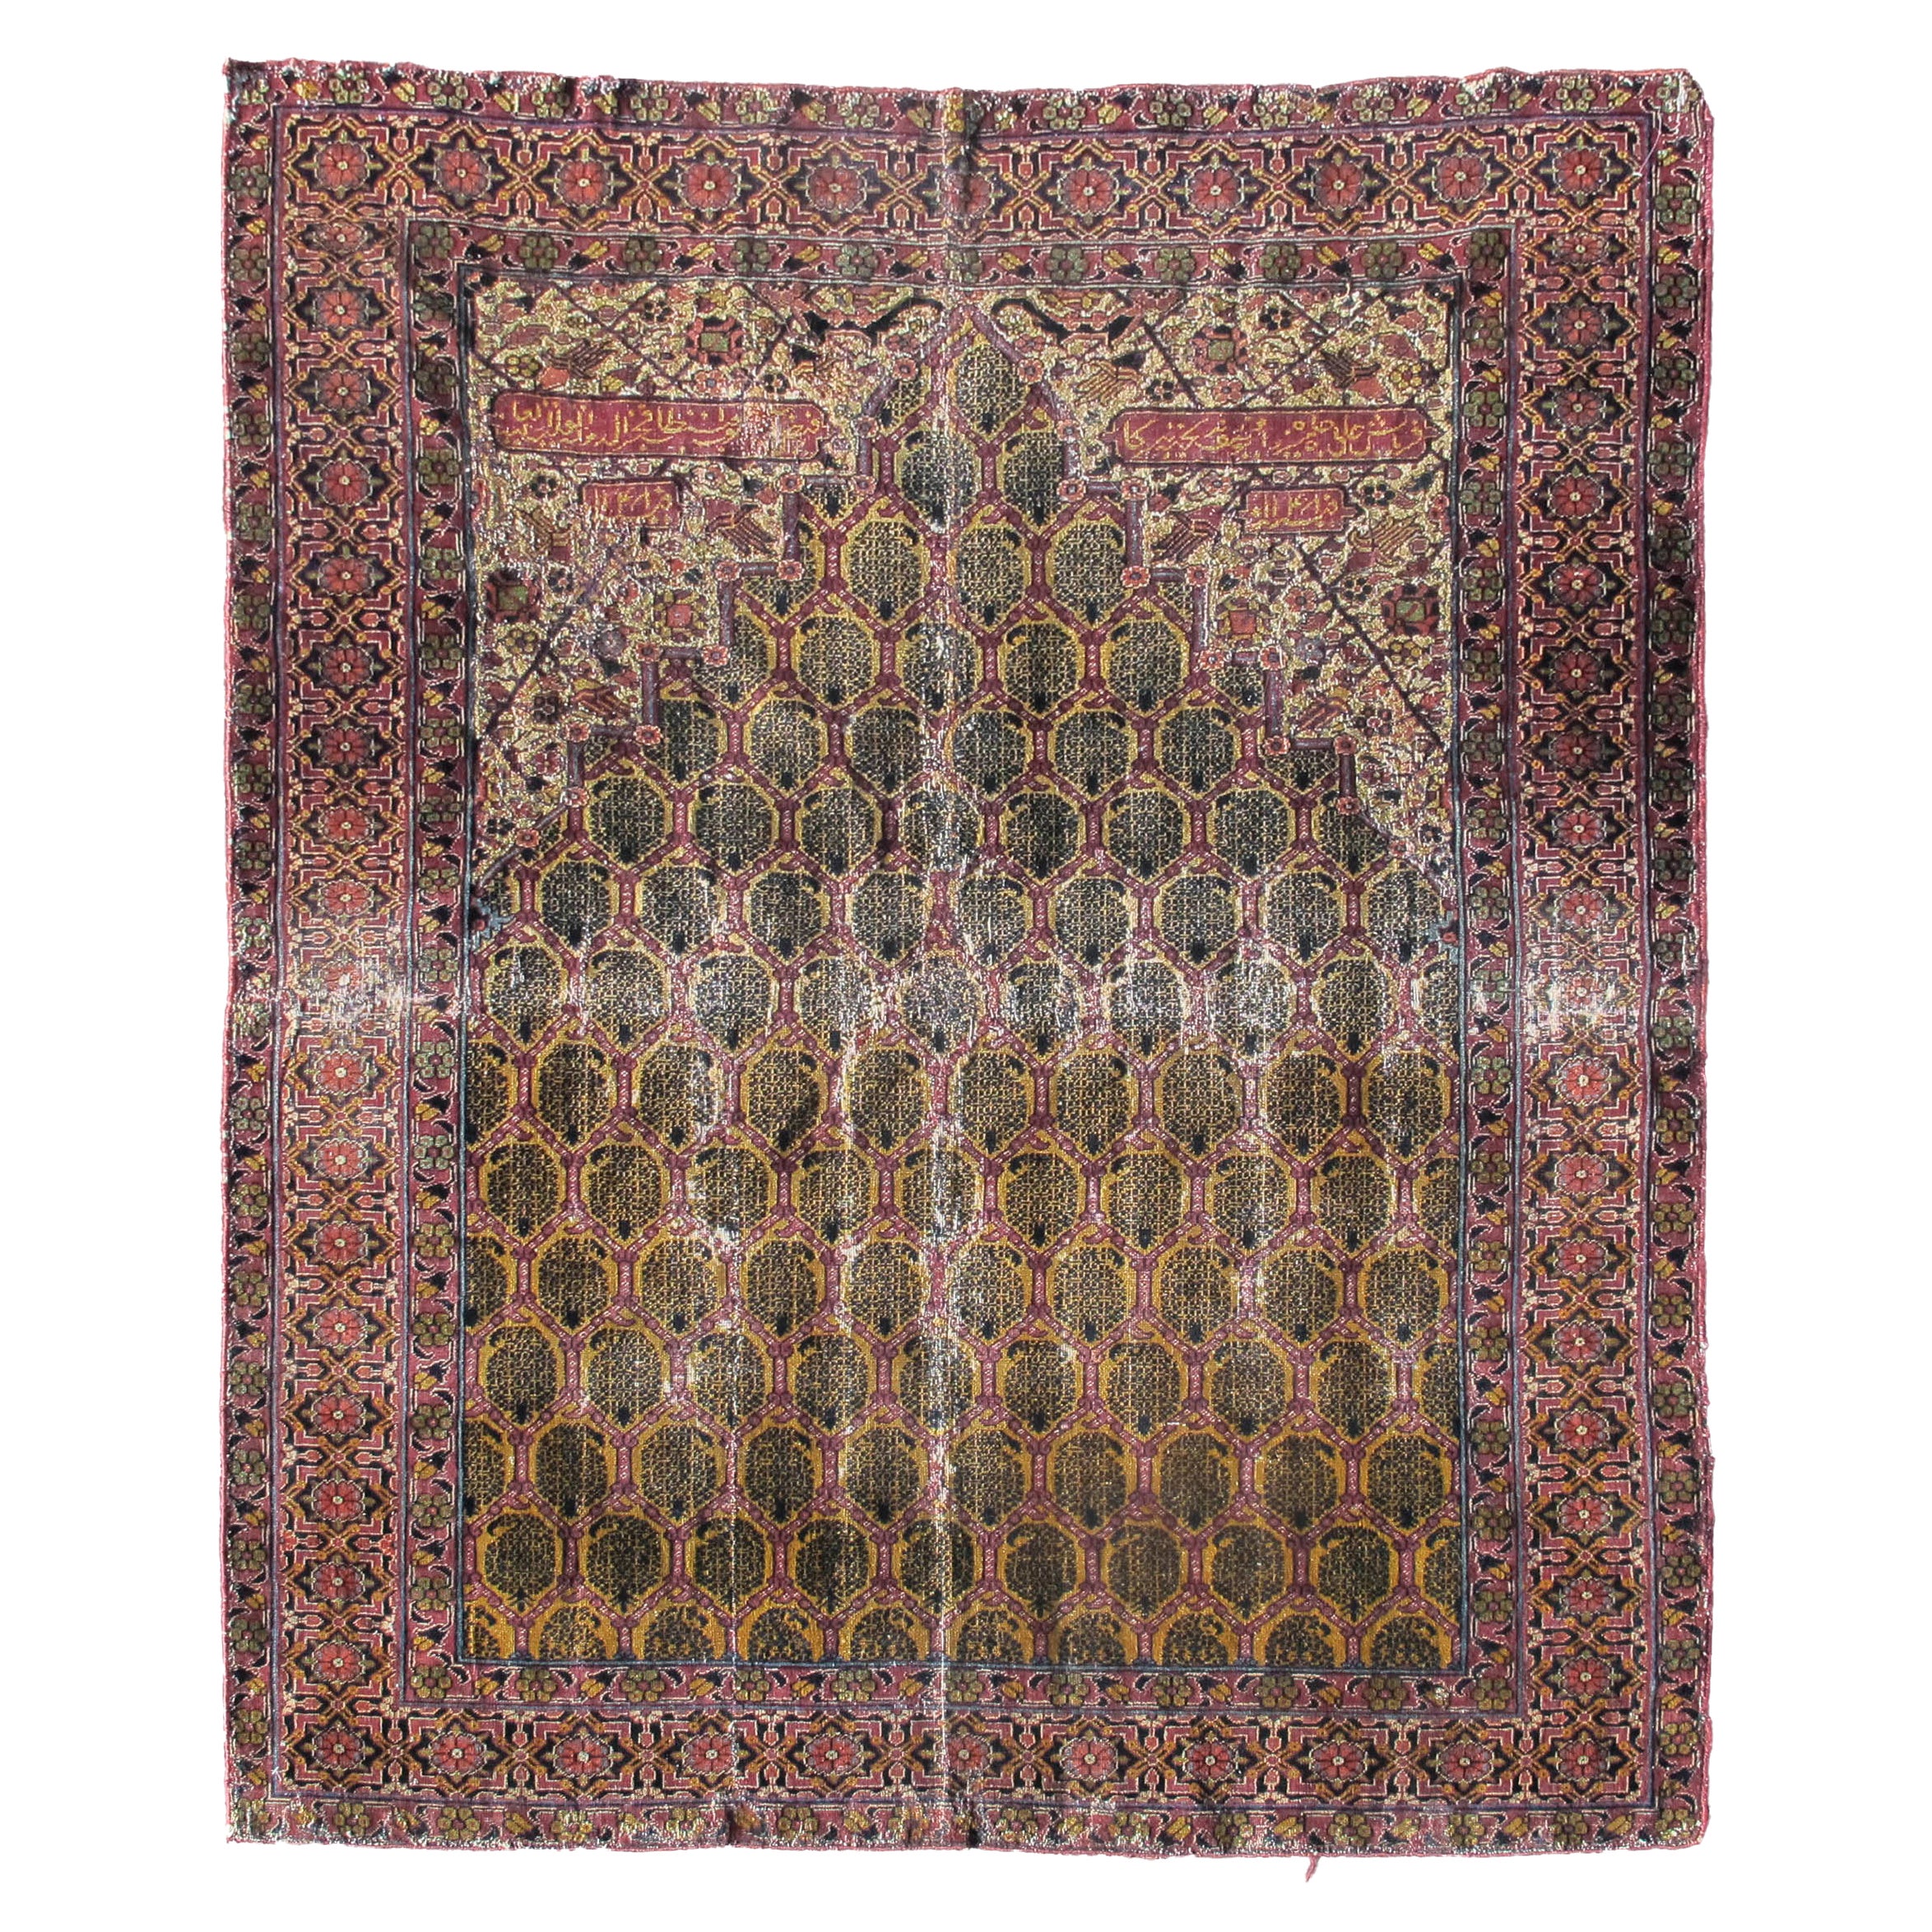 Antique Indo-Persian Prayer Rug, Early 19th Century